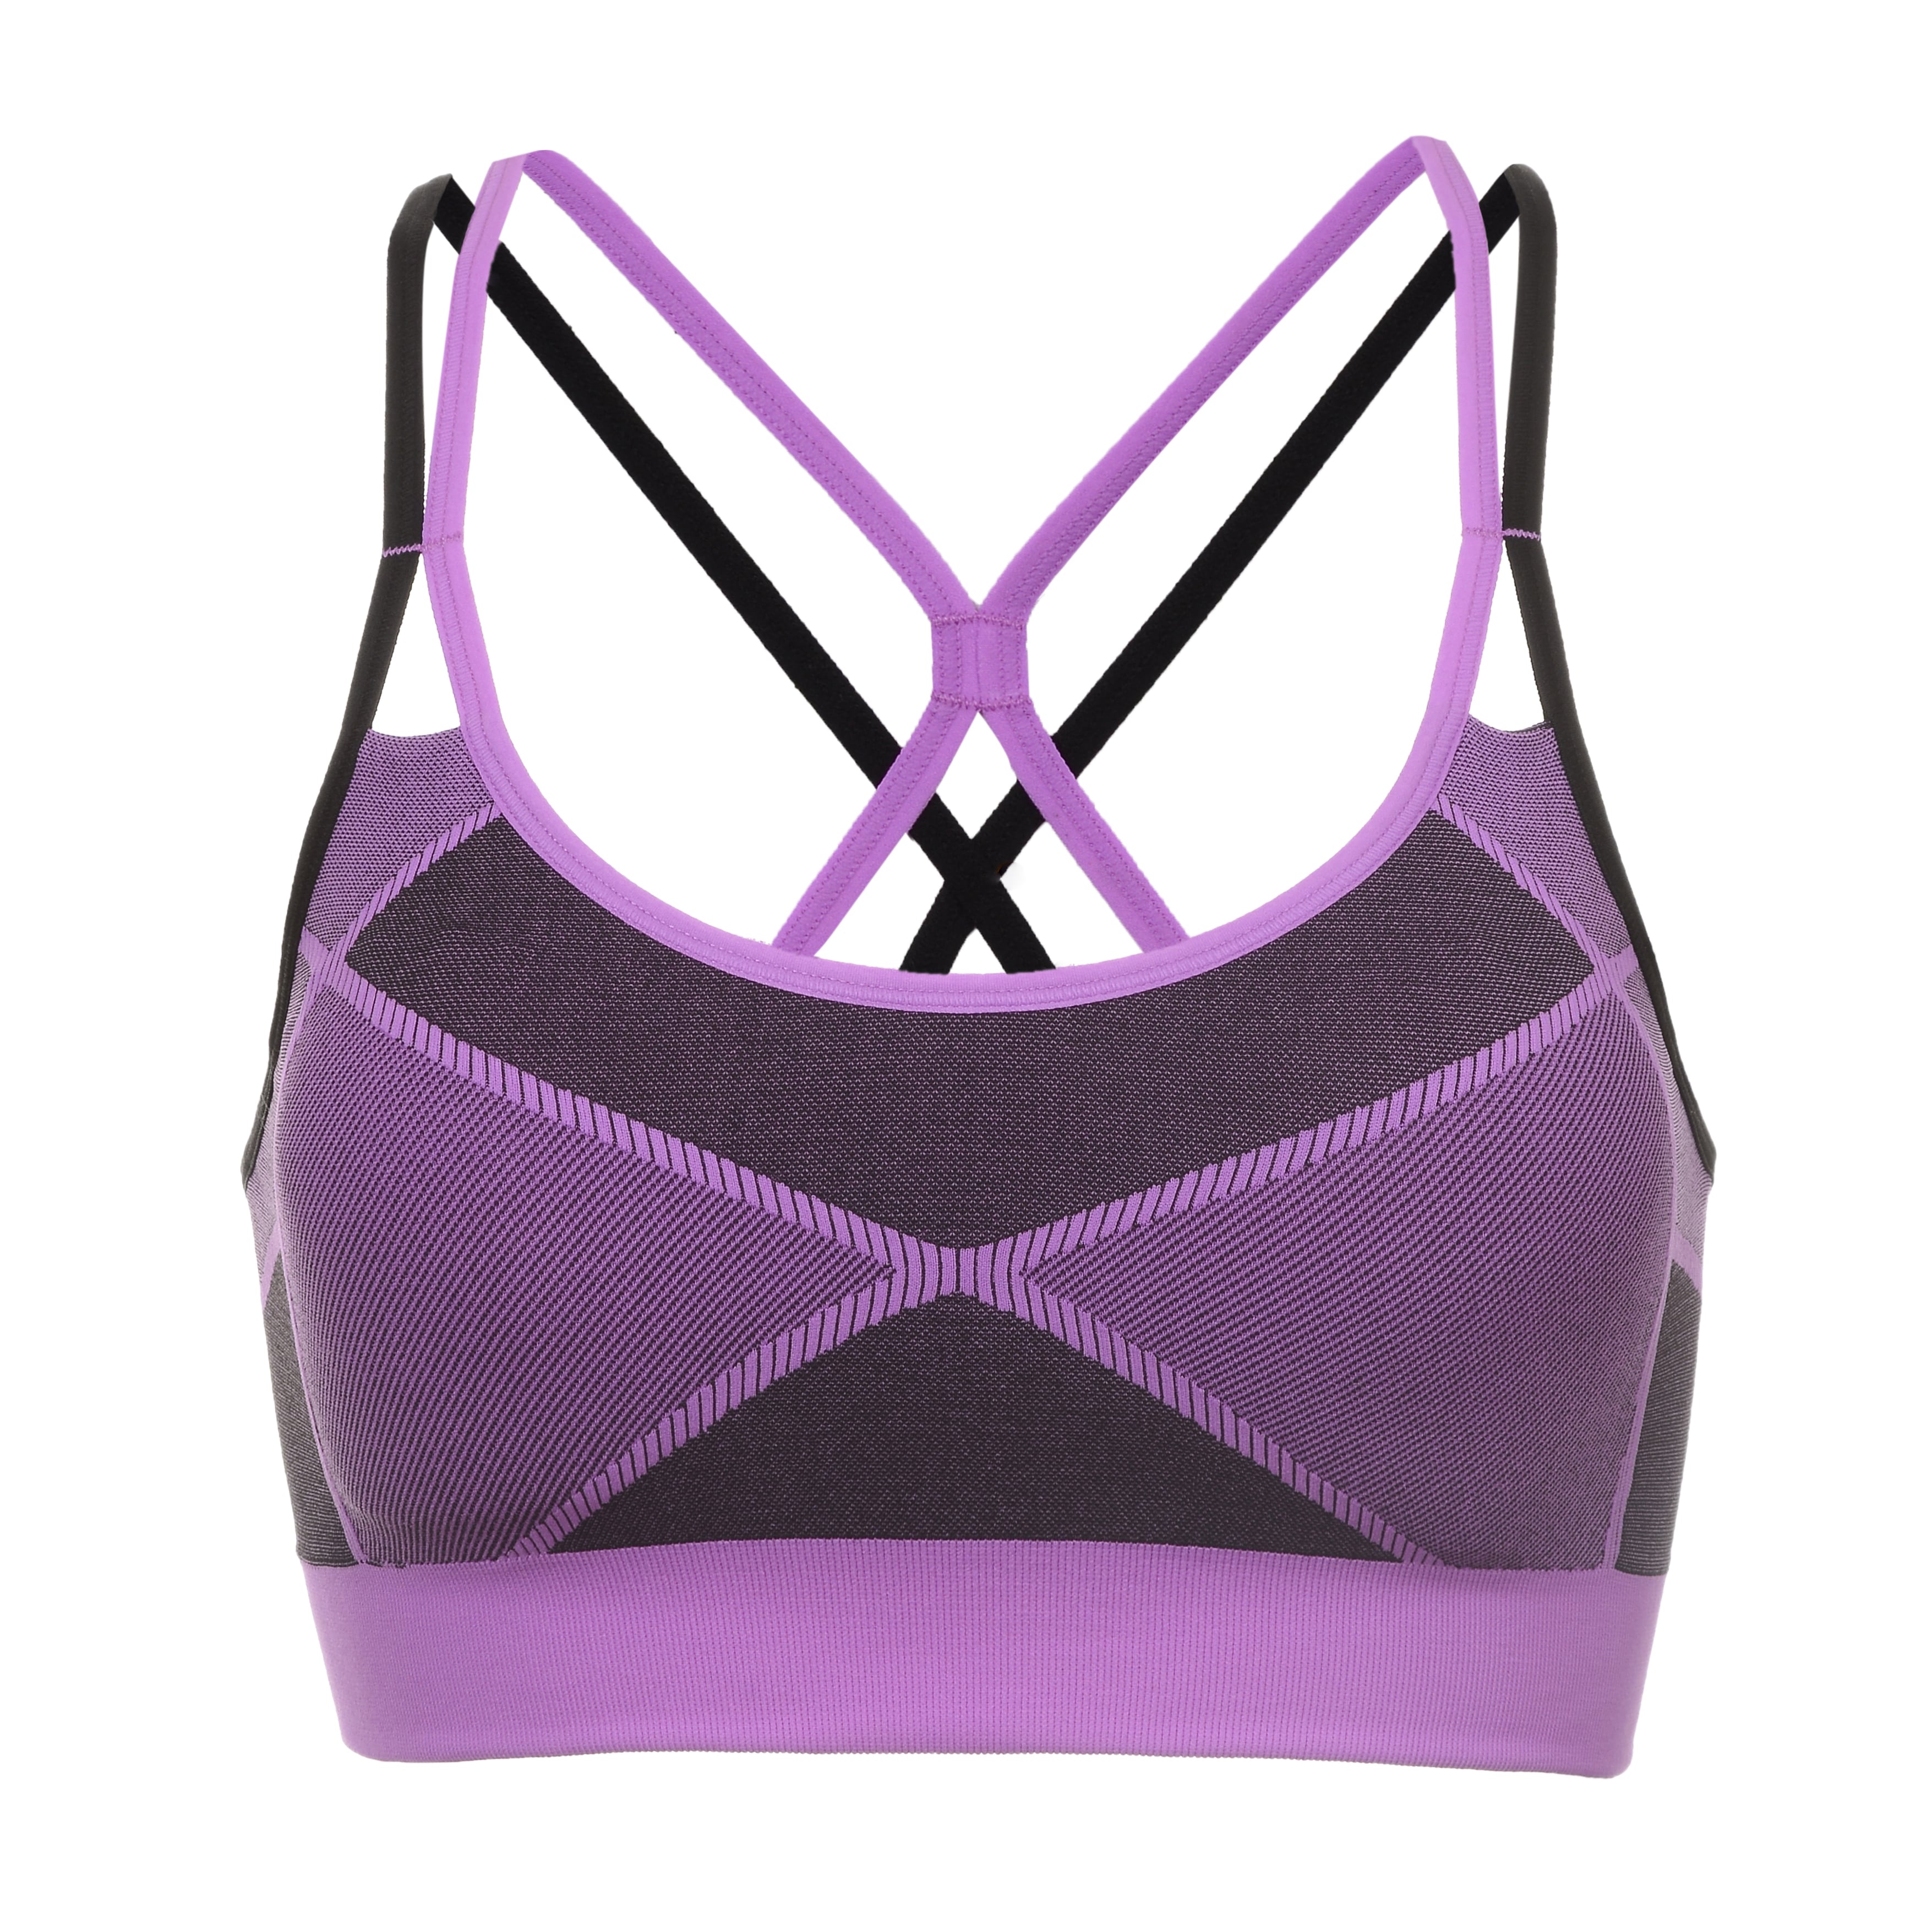 Under Armour Women's Protegee D Sports Bra at